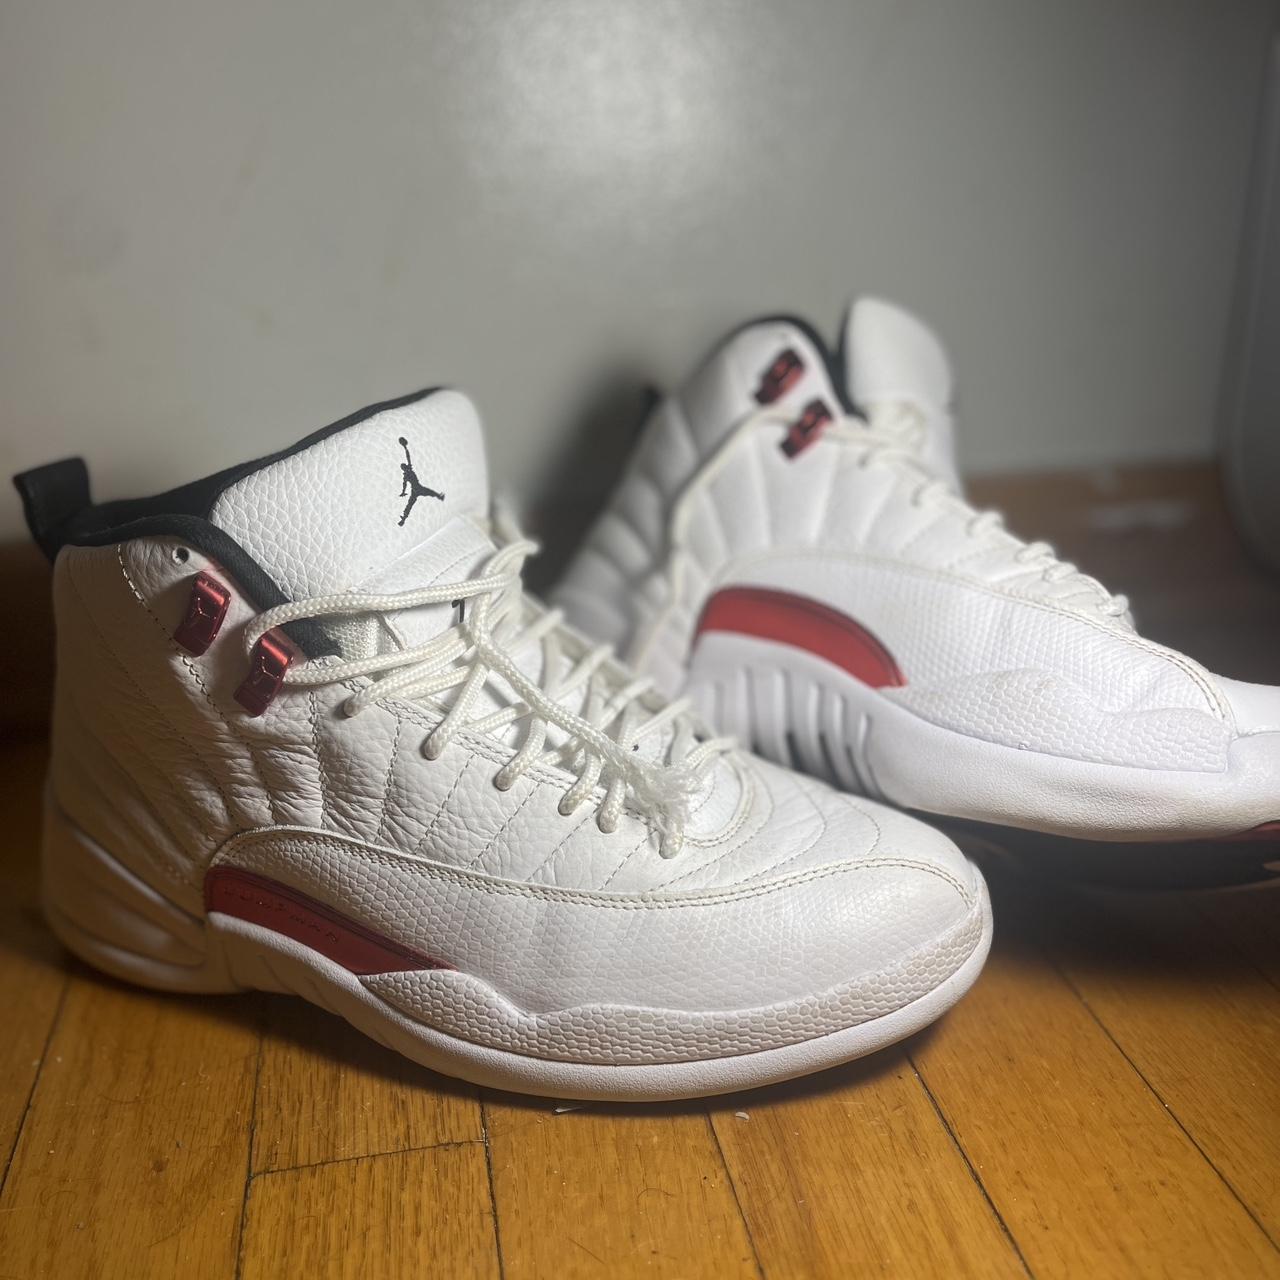 Jordan Men's White and Red Trainers